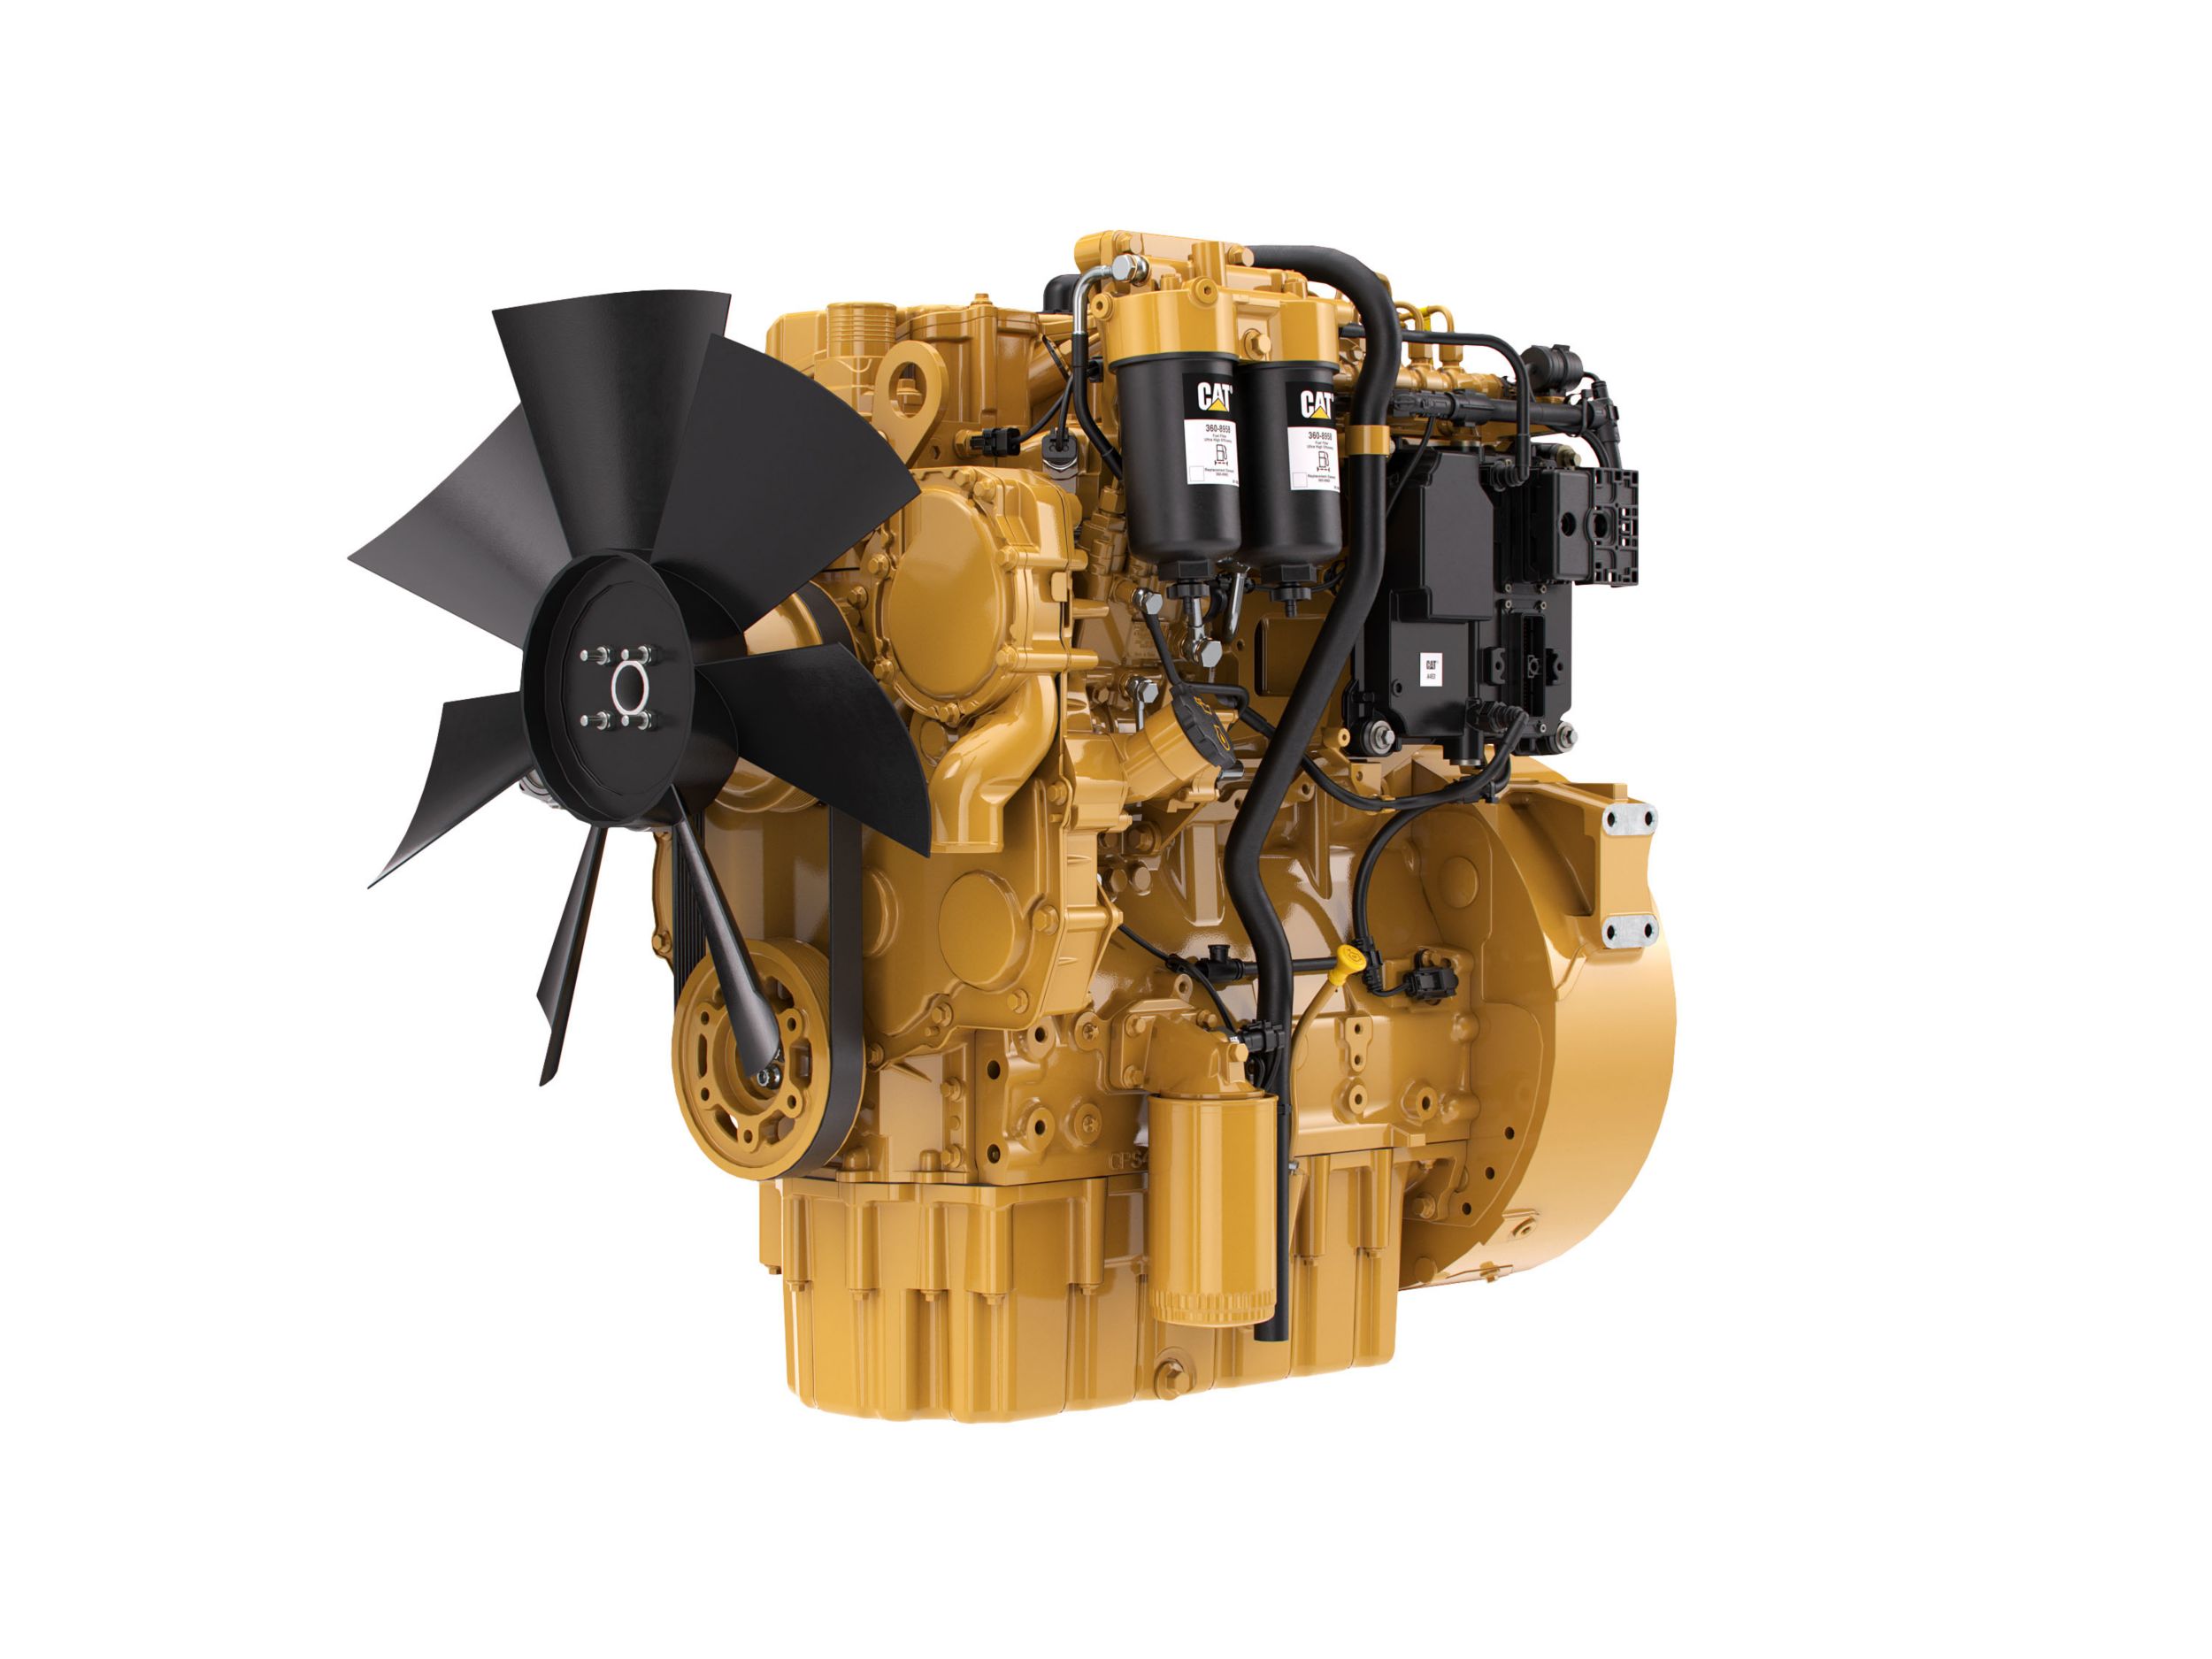 Diesel Engines for Sale - In Stock, Ready to Ship, Low Prices.